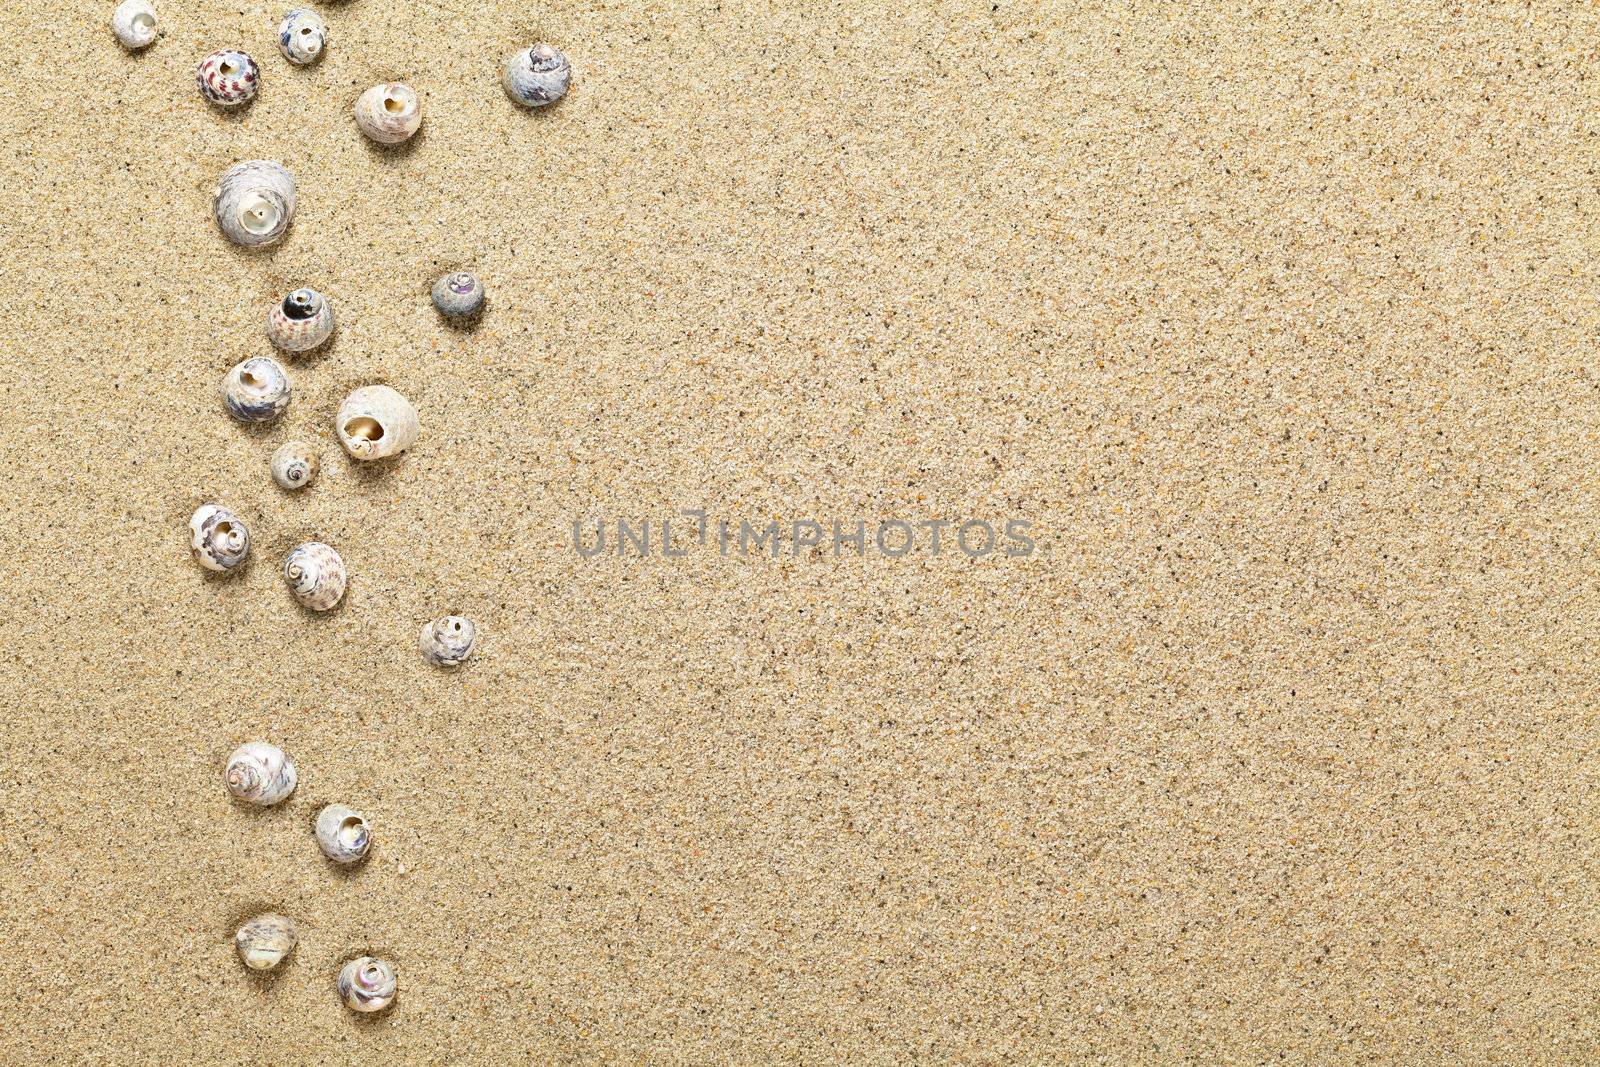 Sea shells on sand background. Summer beach concept with copy space. Top view